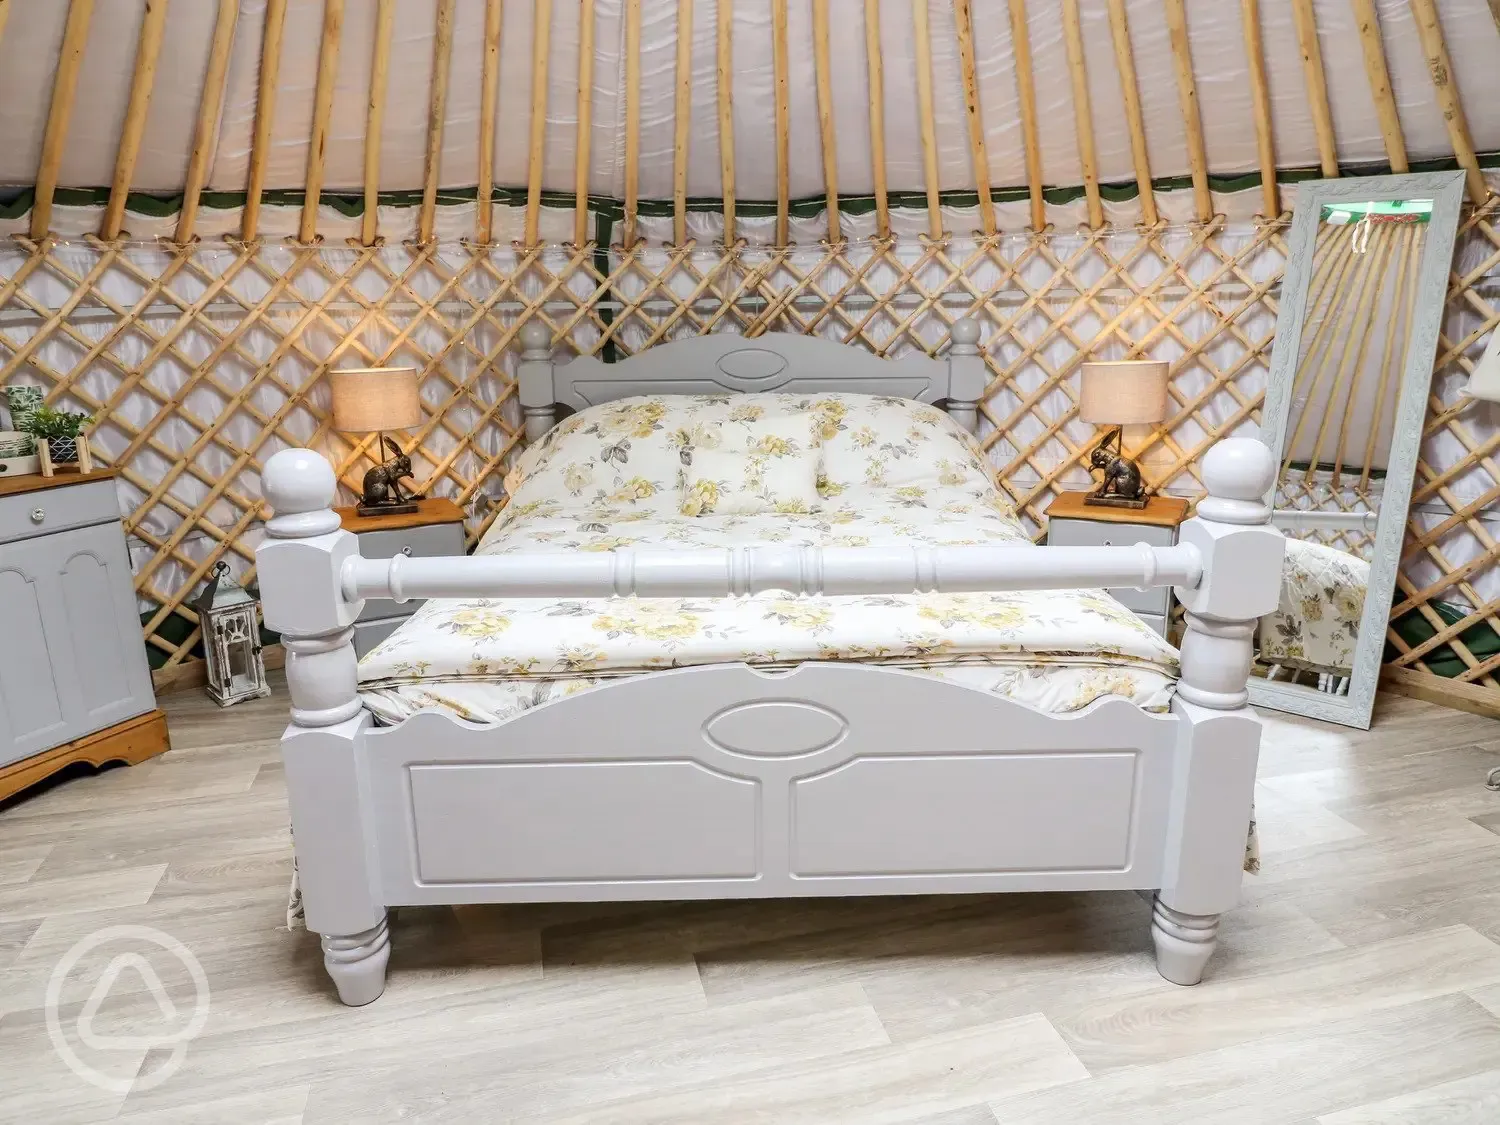 Silver Birch yurt with hot tub king size bed